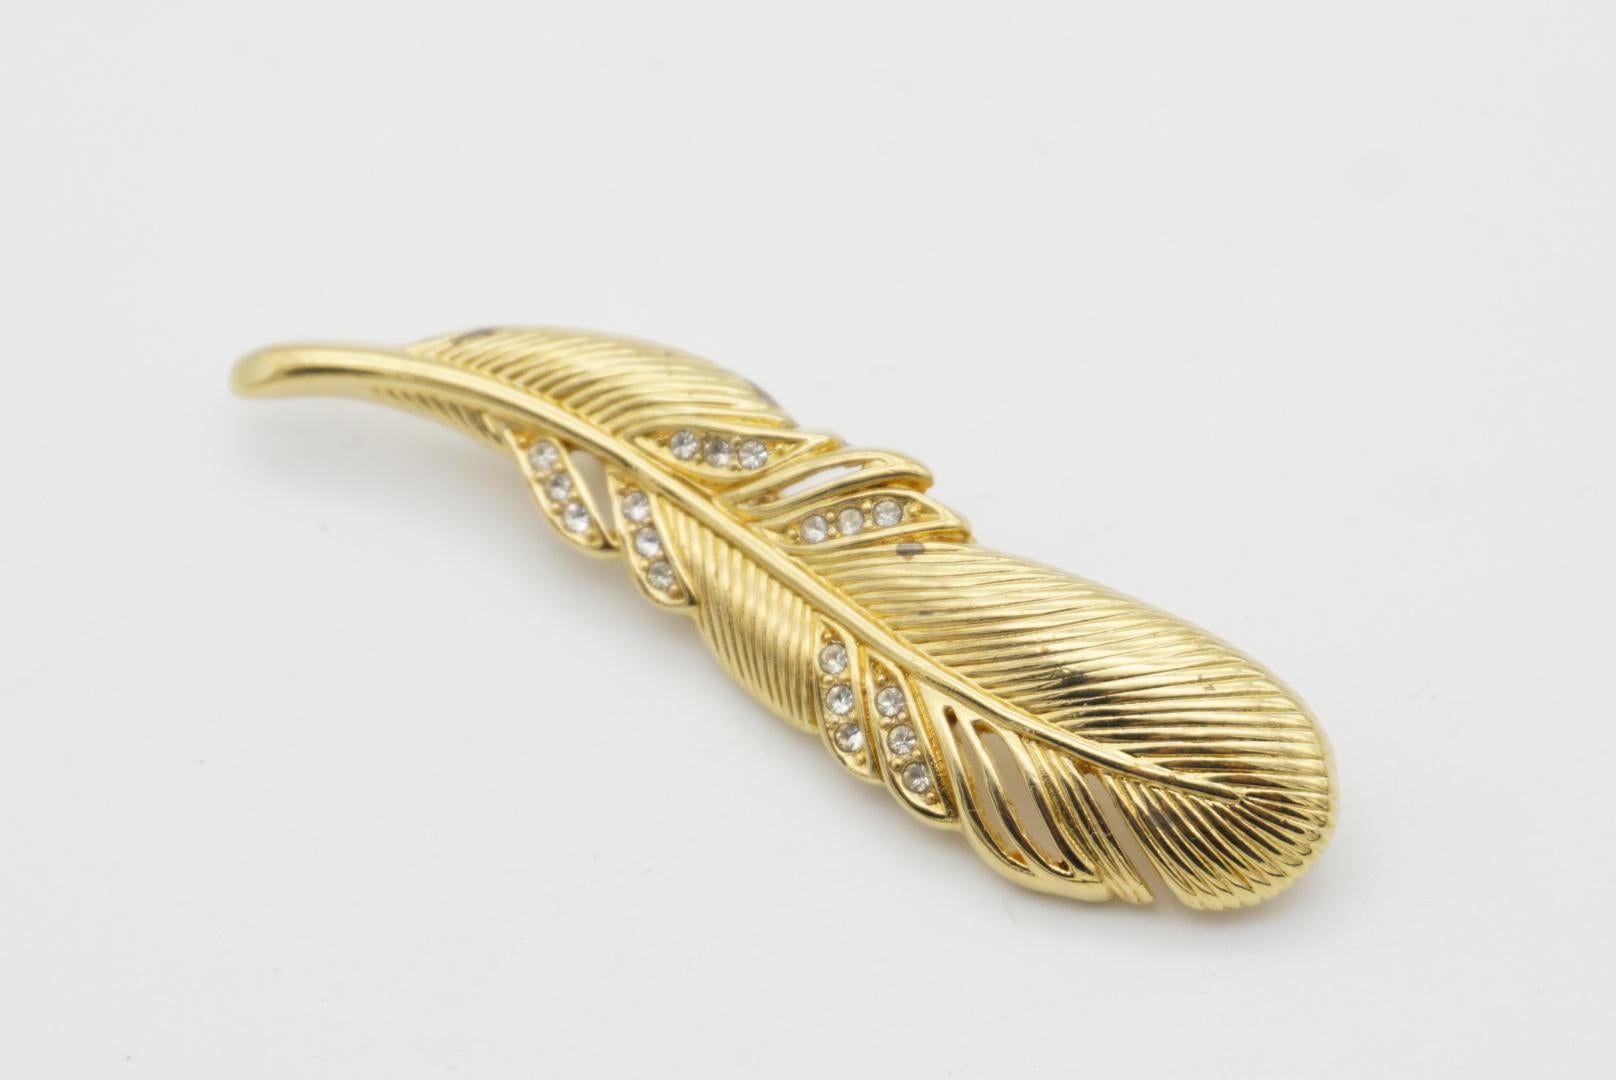 Christian Dior 1970s Vintage Textured Long Feather Leaf Crystals Openwork Brooch For Sale 2